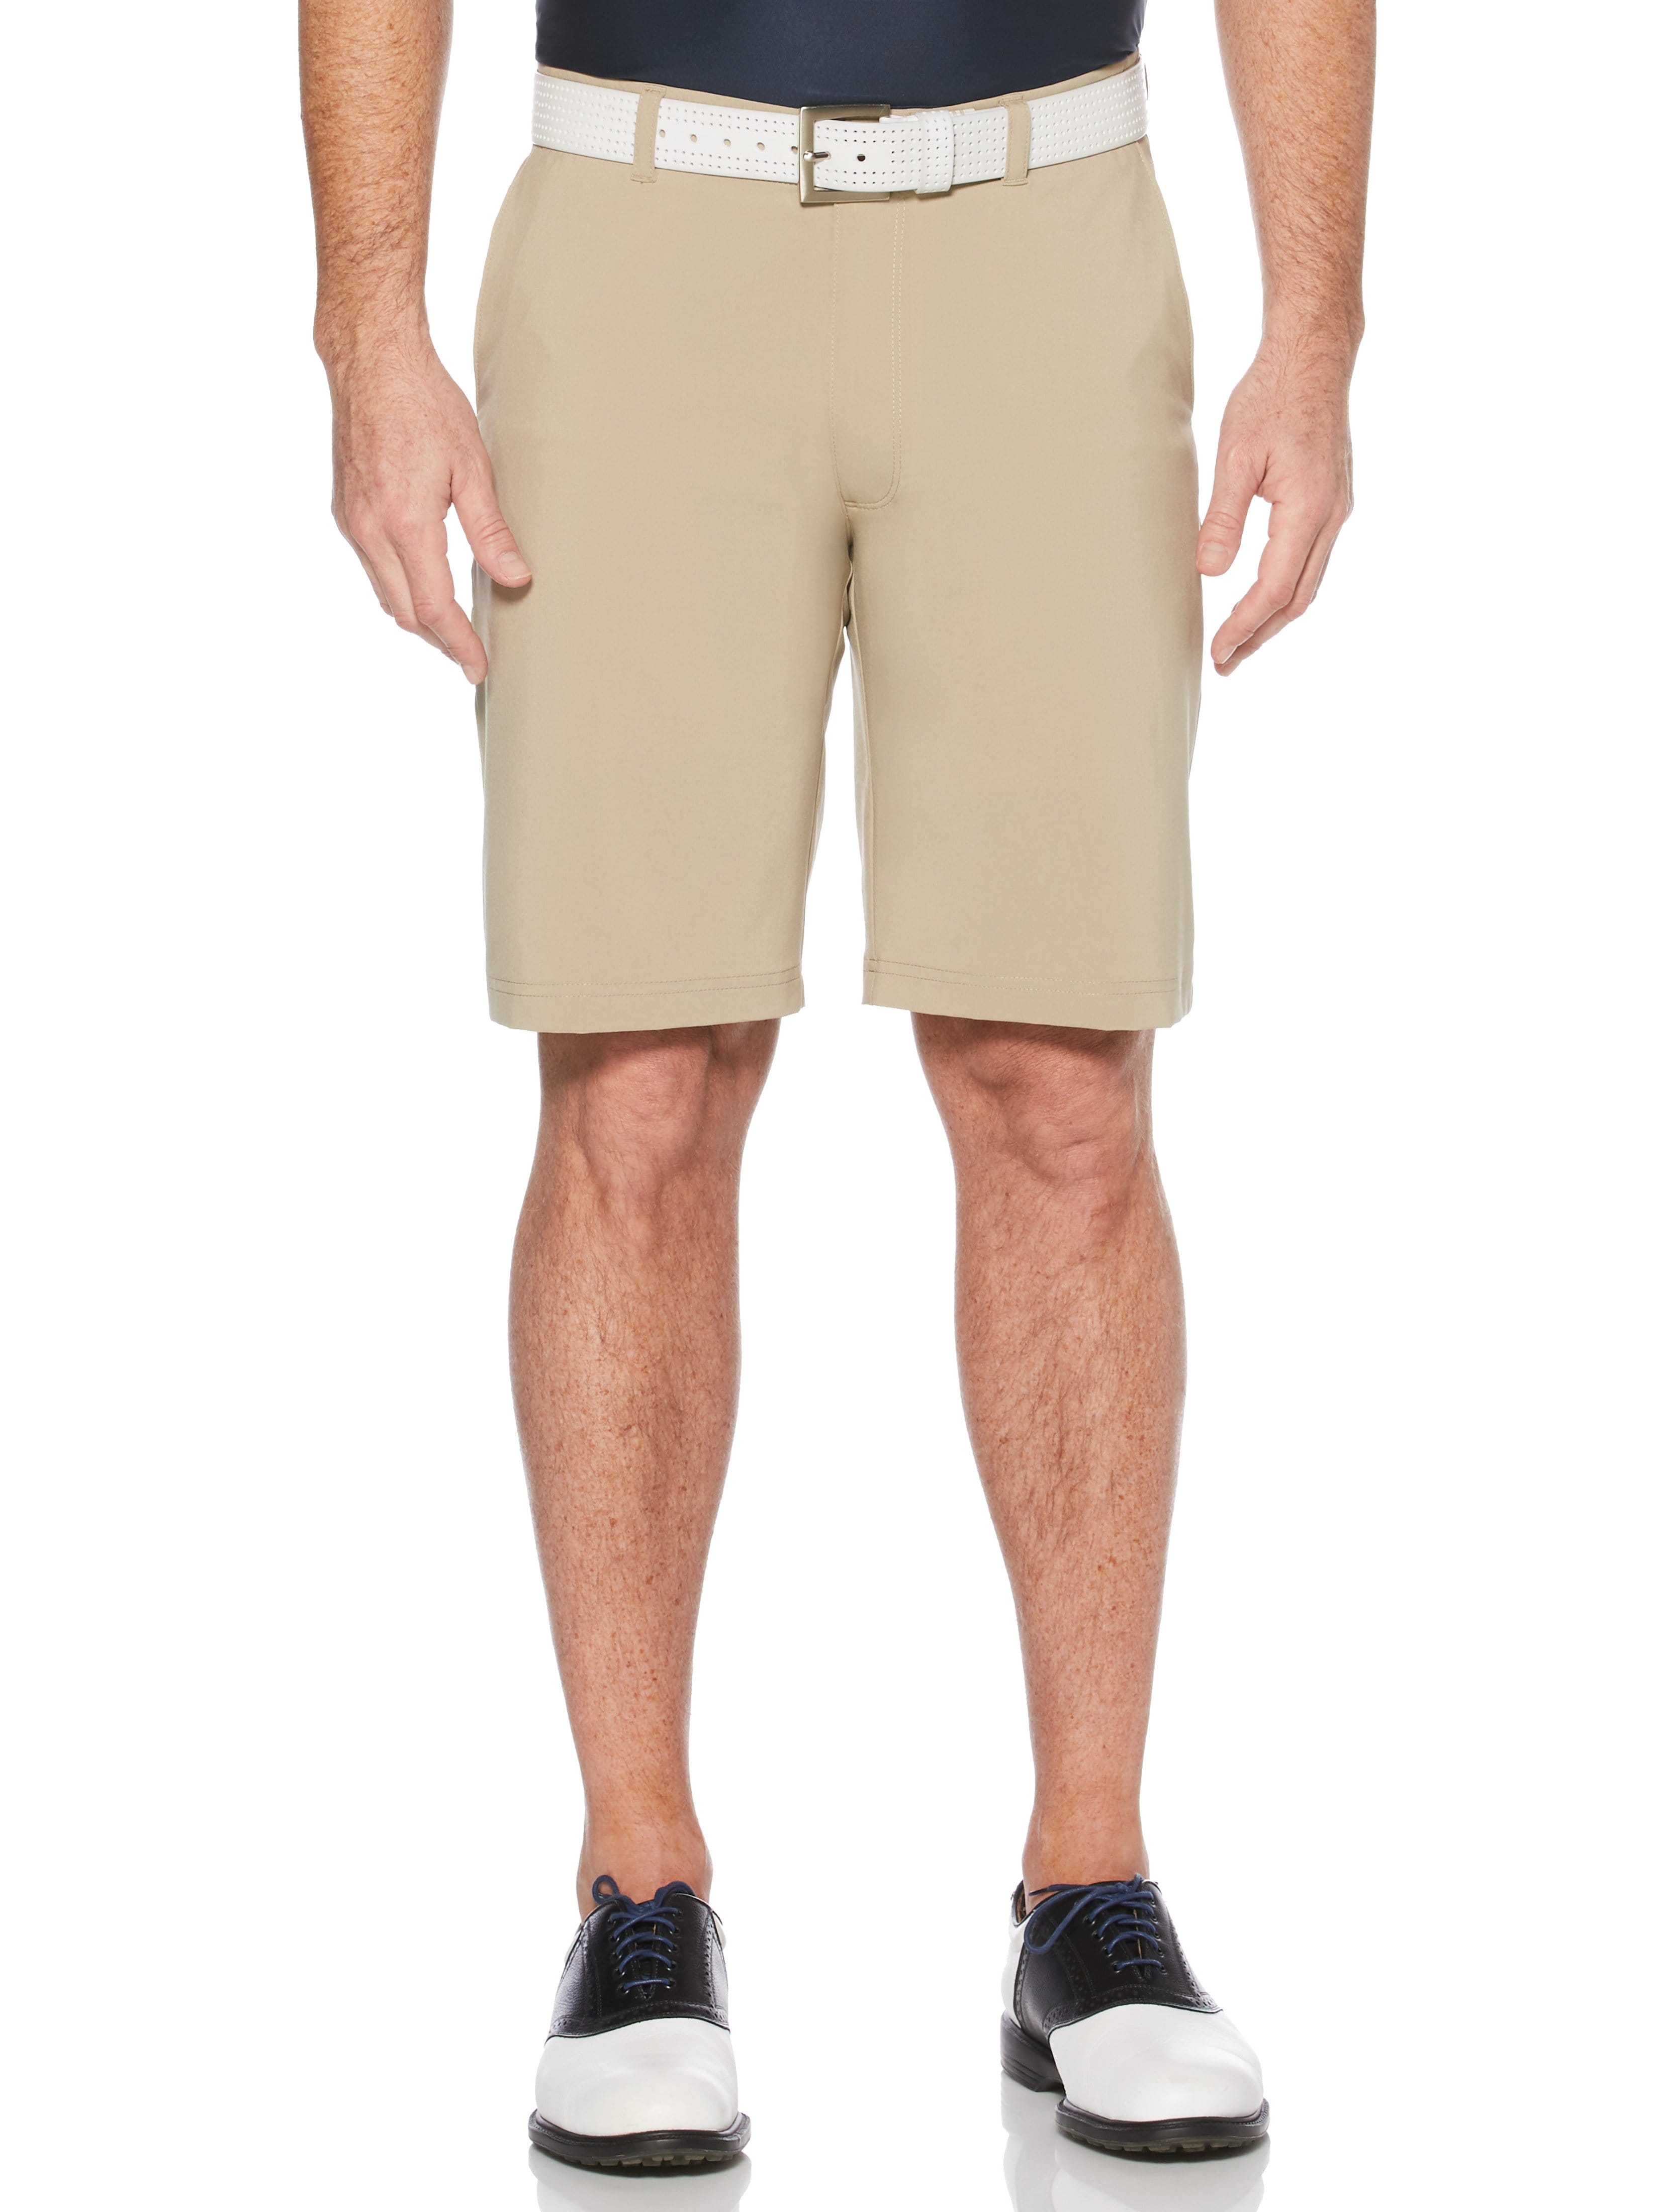 Jack Nicklaus Mens Flat Front Solid Golf Shorts w/ Active Waistband and Media Pocket, Size 38, Chinchilla Beige, Polyester/Elastane